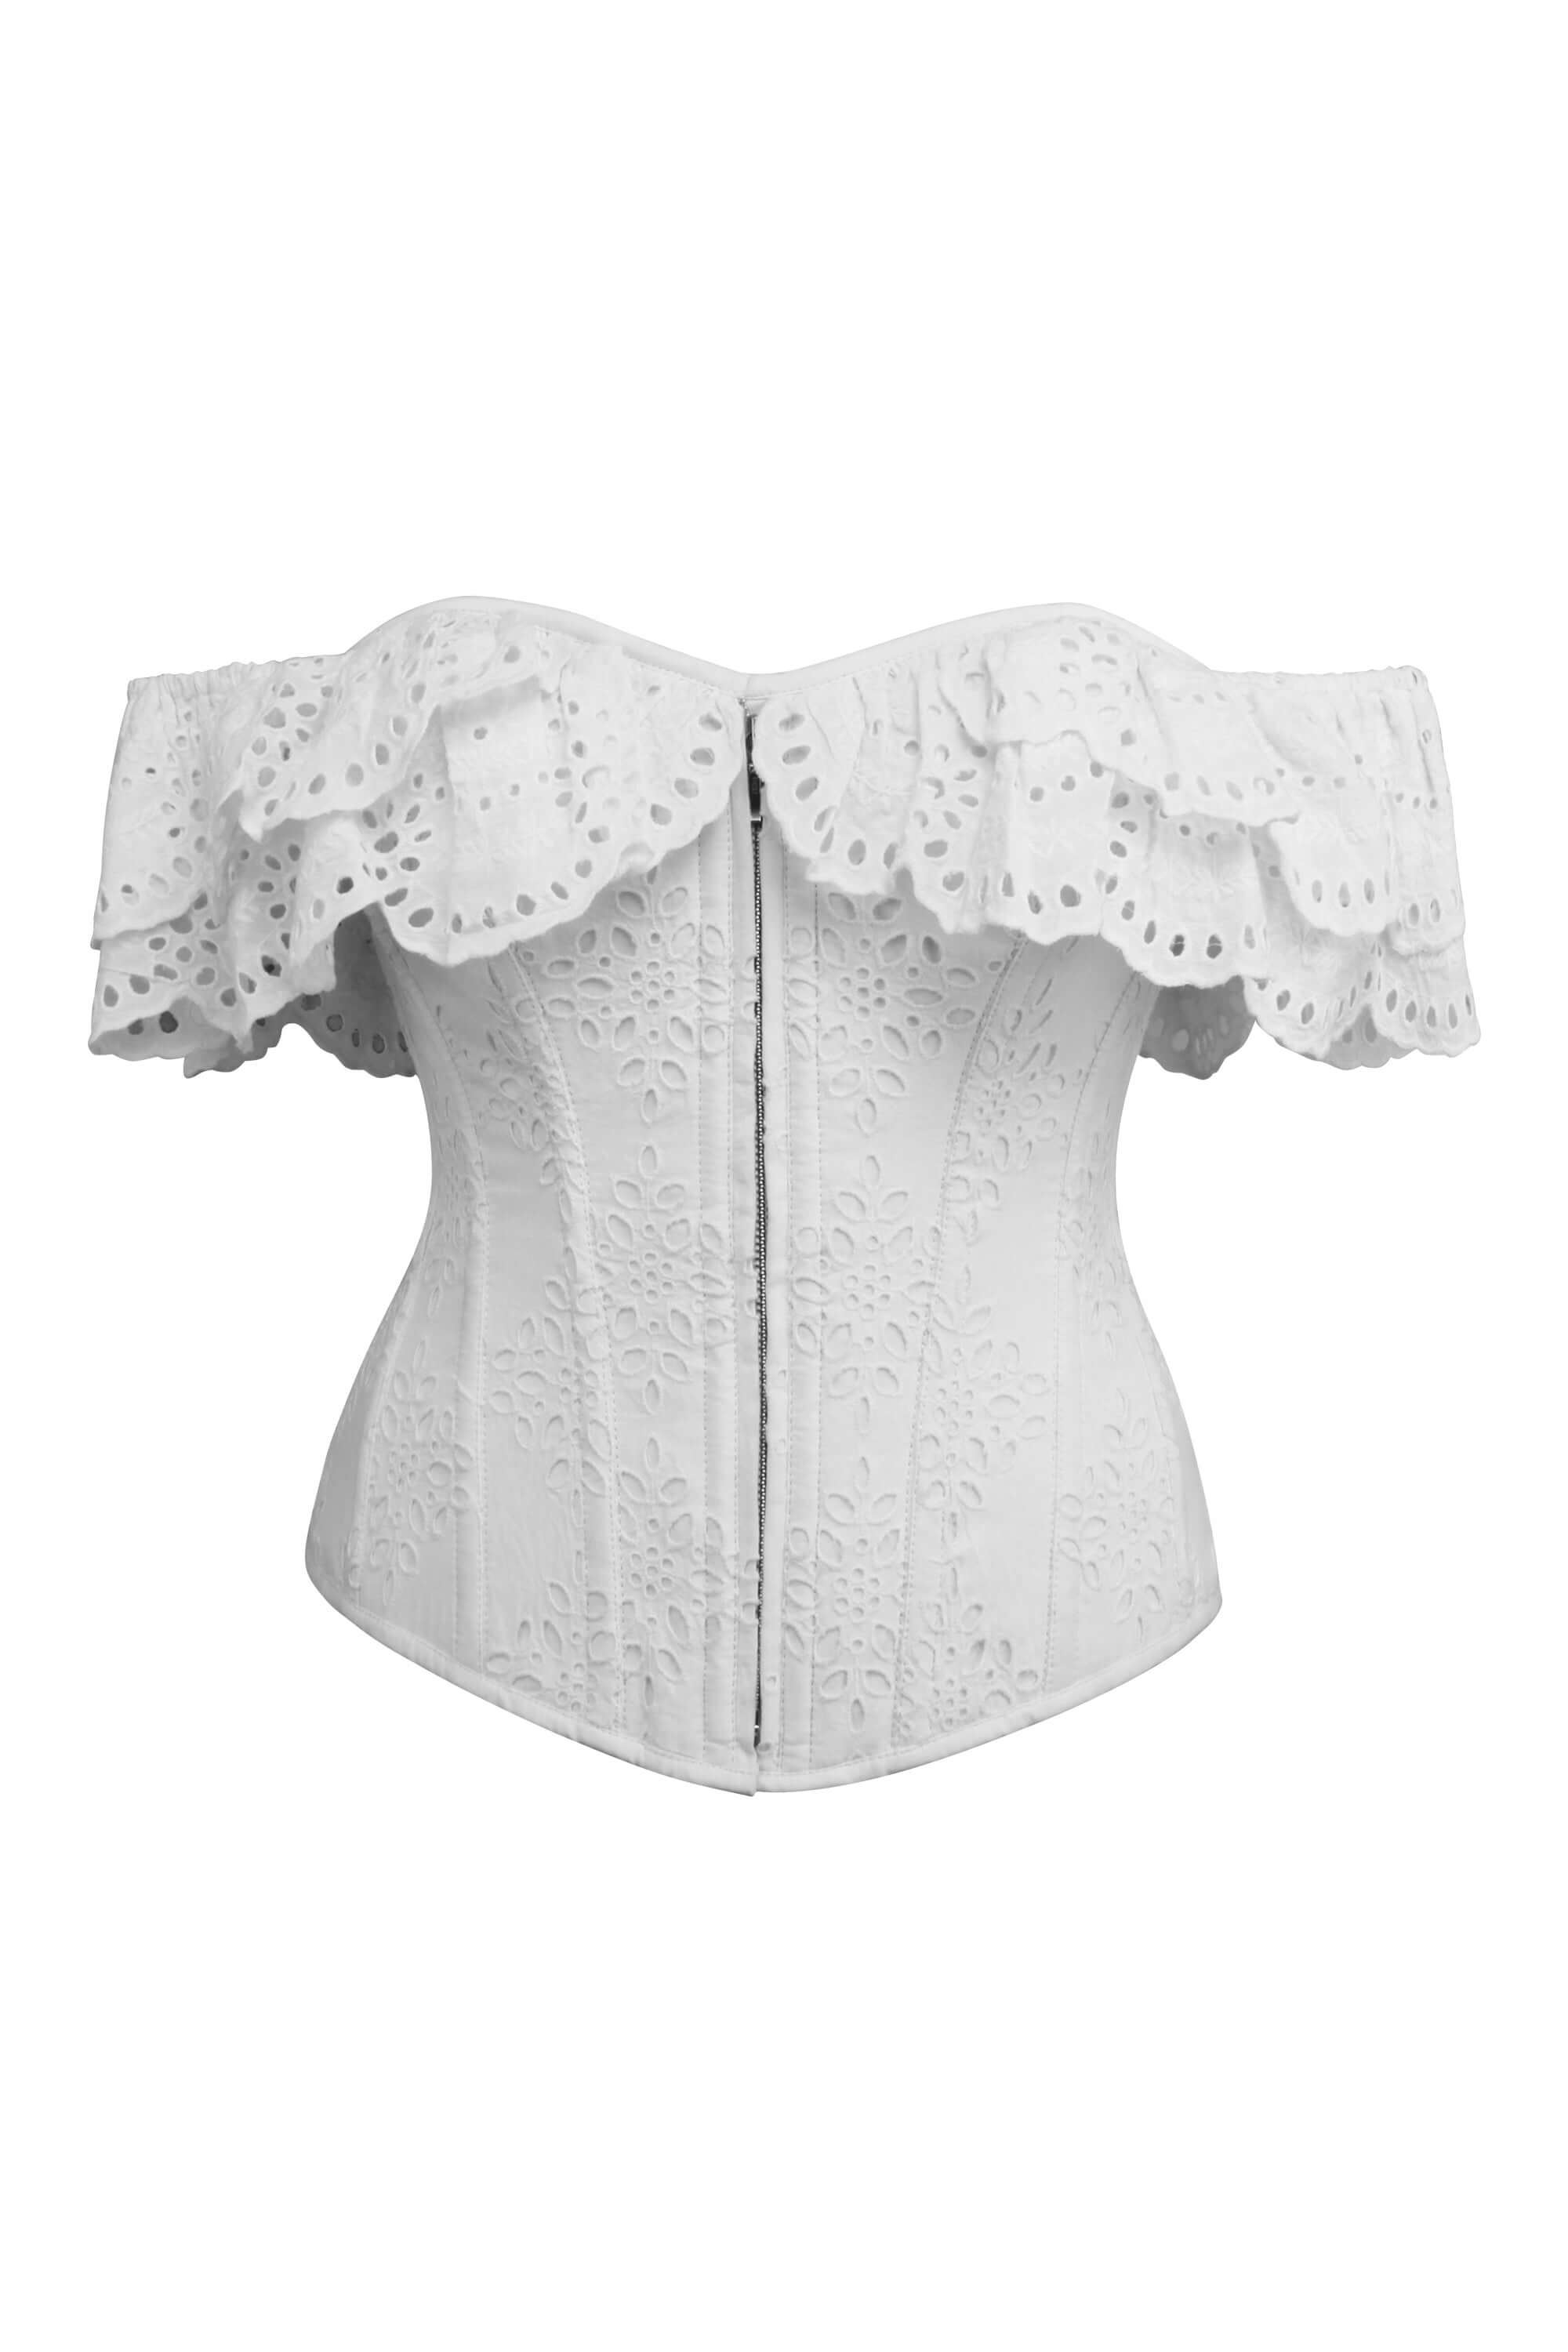 Marigold White Cotton Corset Top with Frill Sleeves